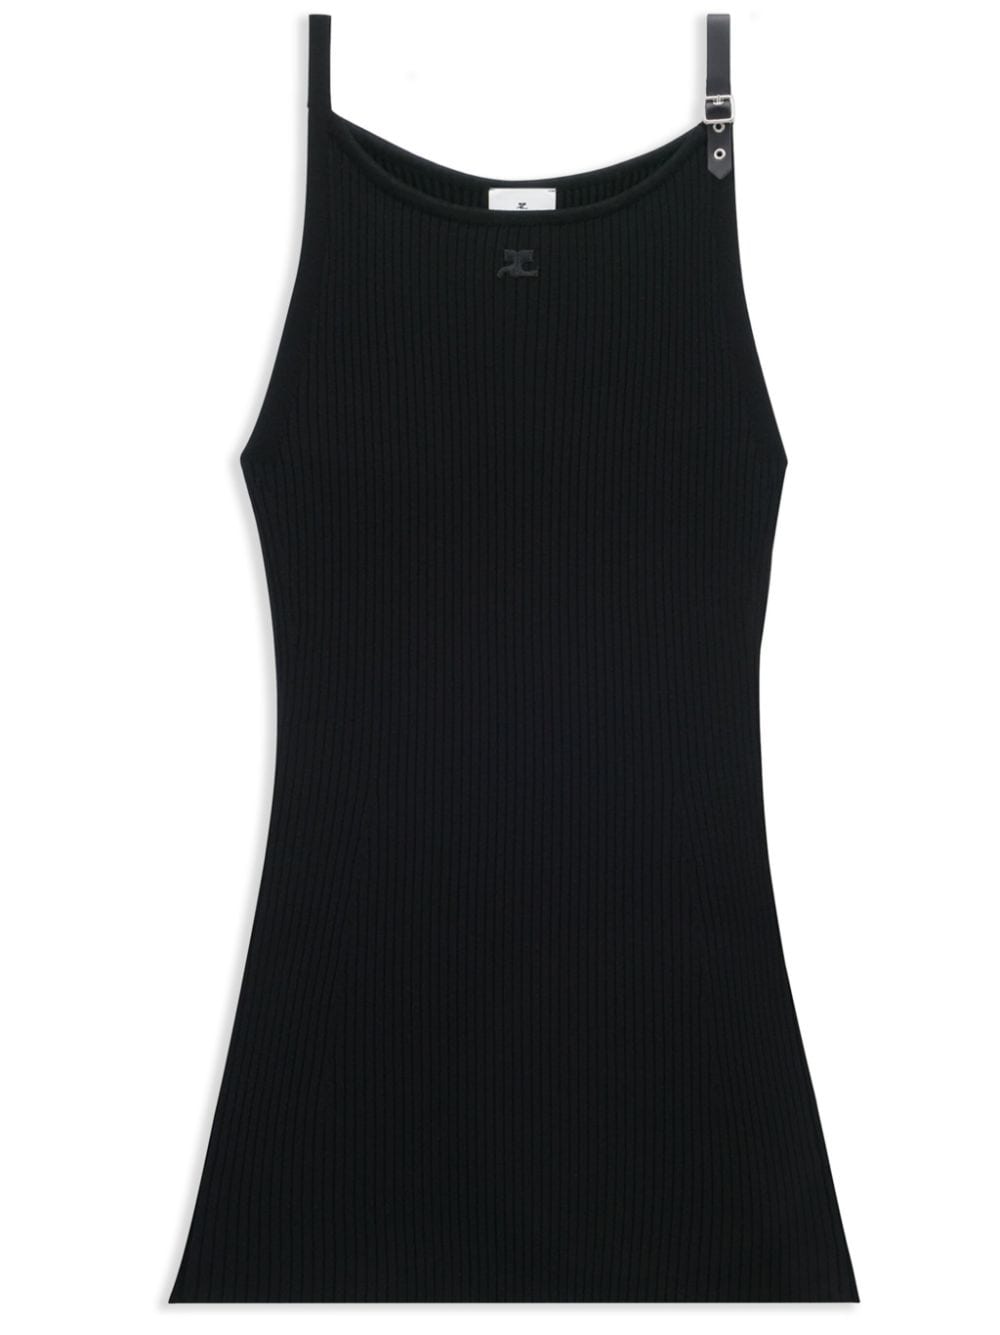 Women's Black Ribbed Knit Dress with Logo Buckle-Strap Fastening